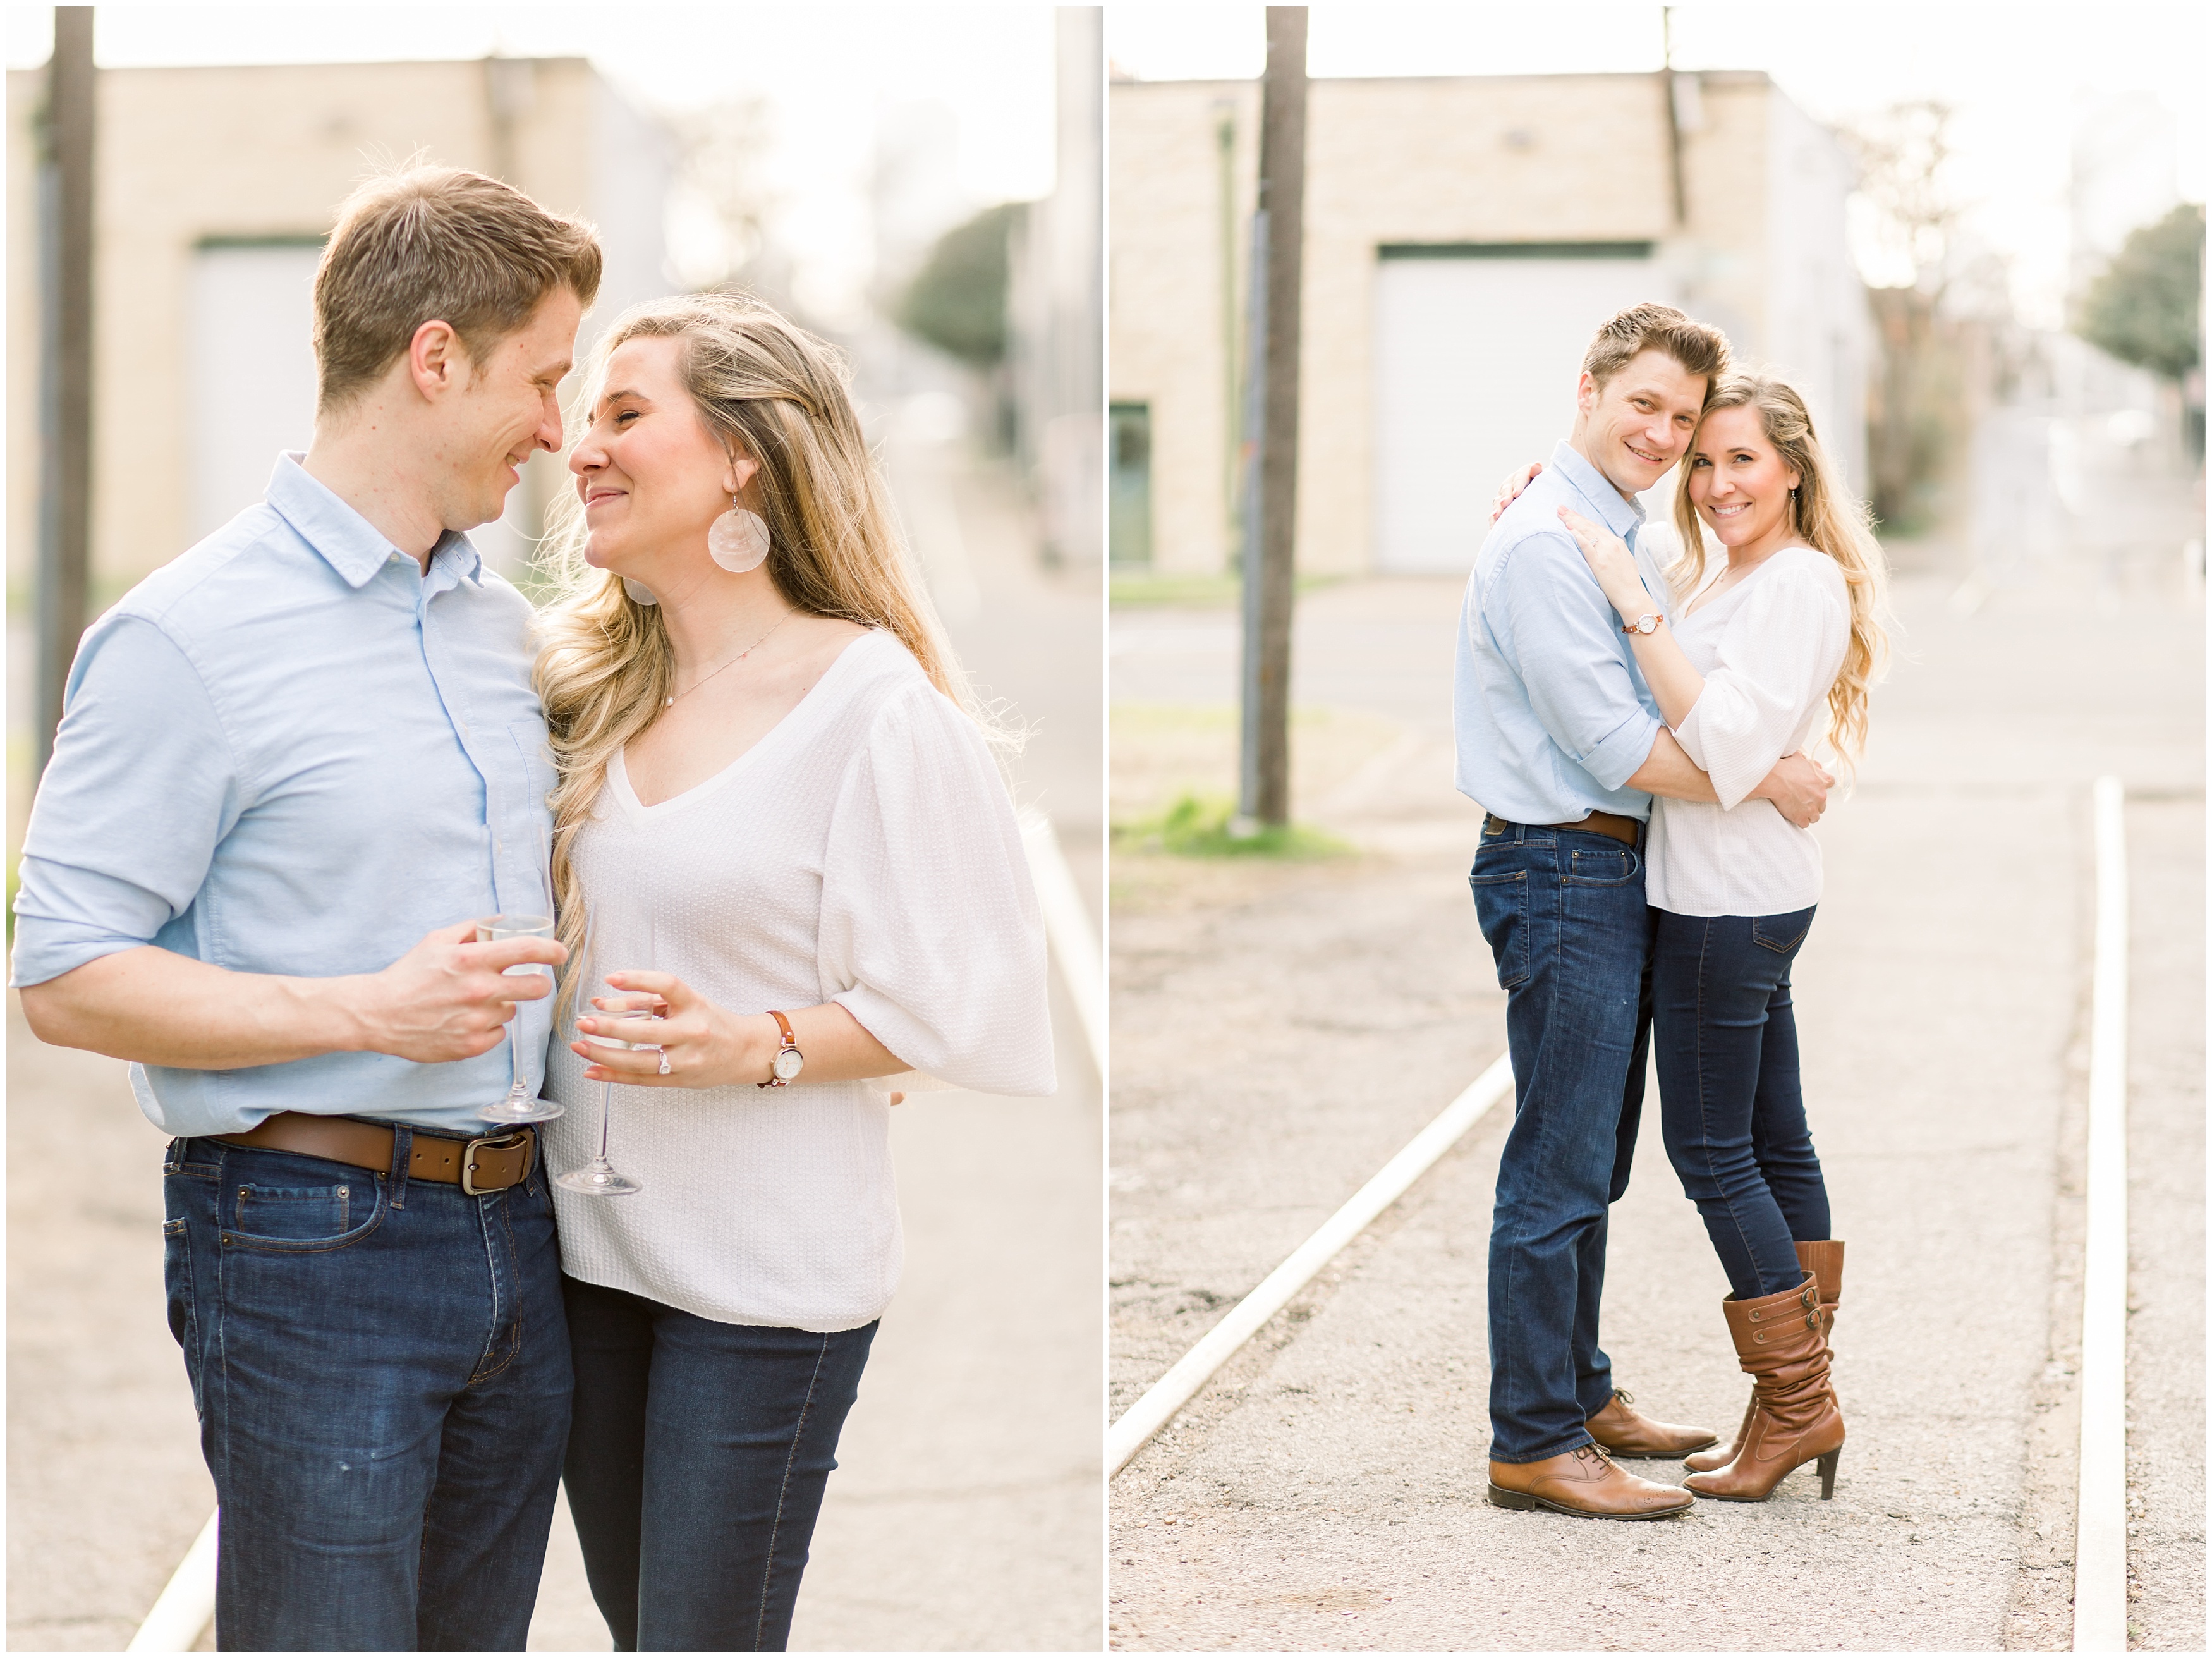 A winter deep ellum engagement session in Richardson, TX by photographer Courtney Bosworth.